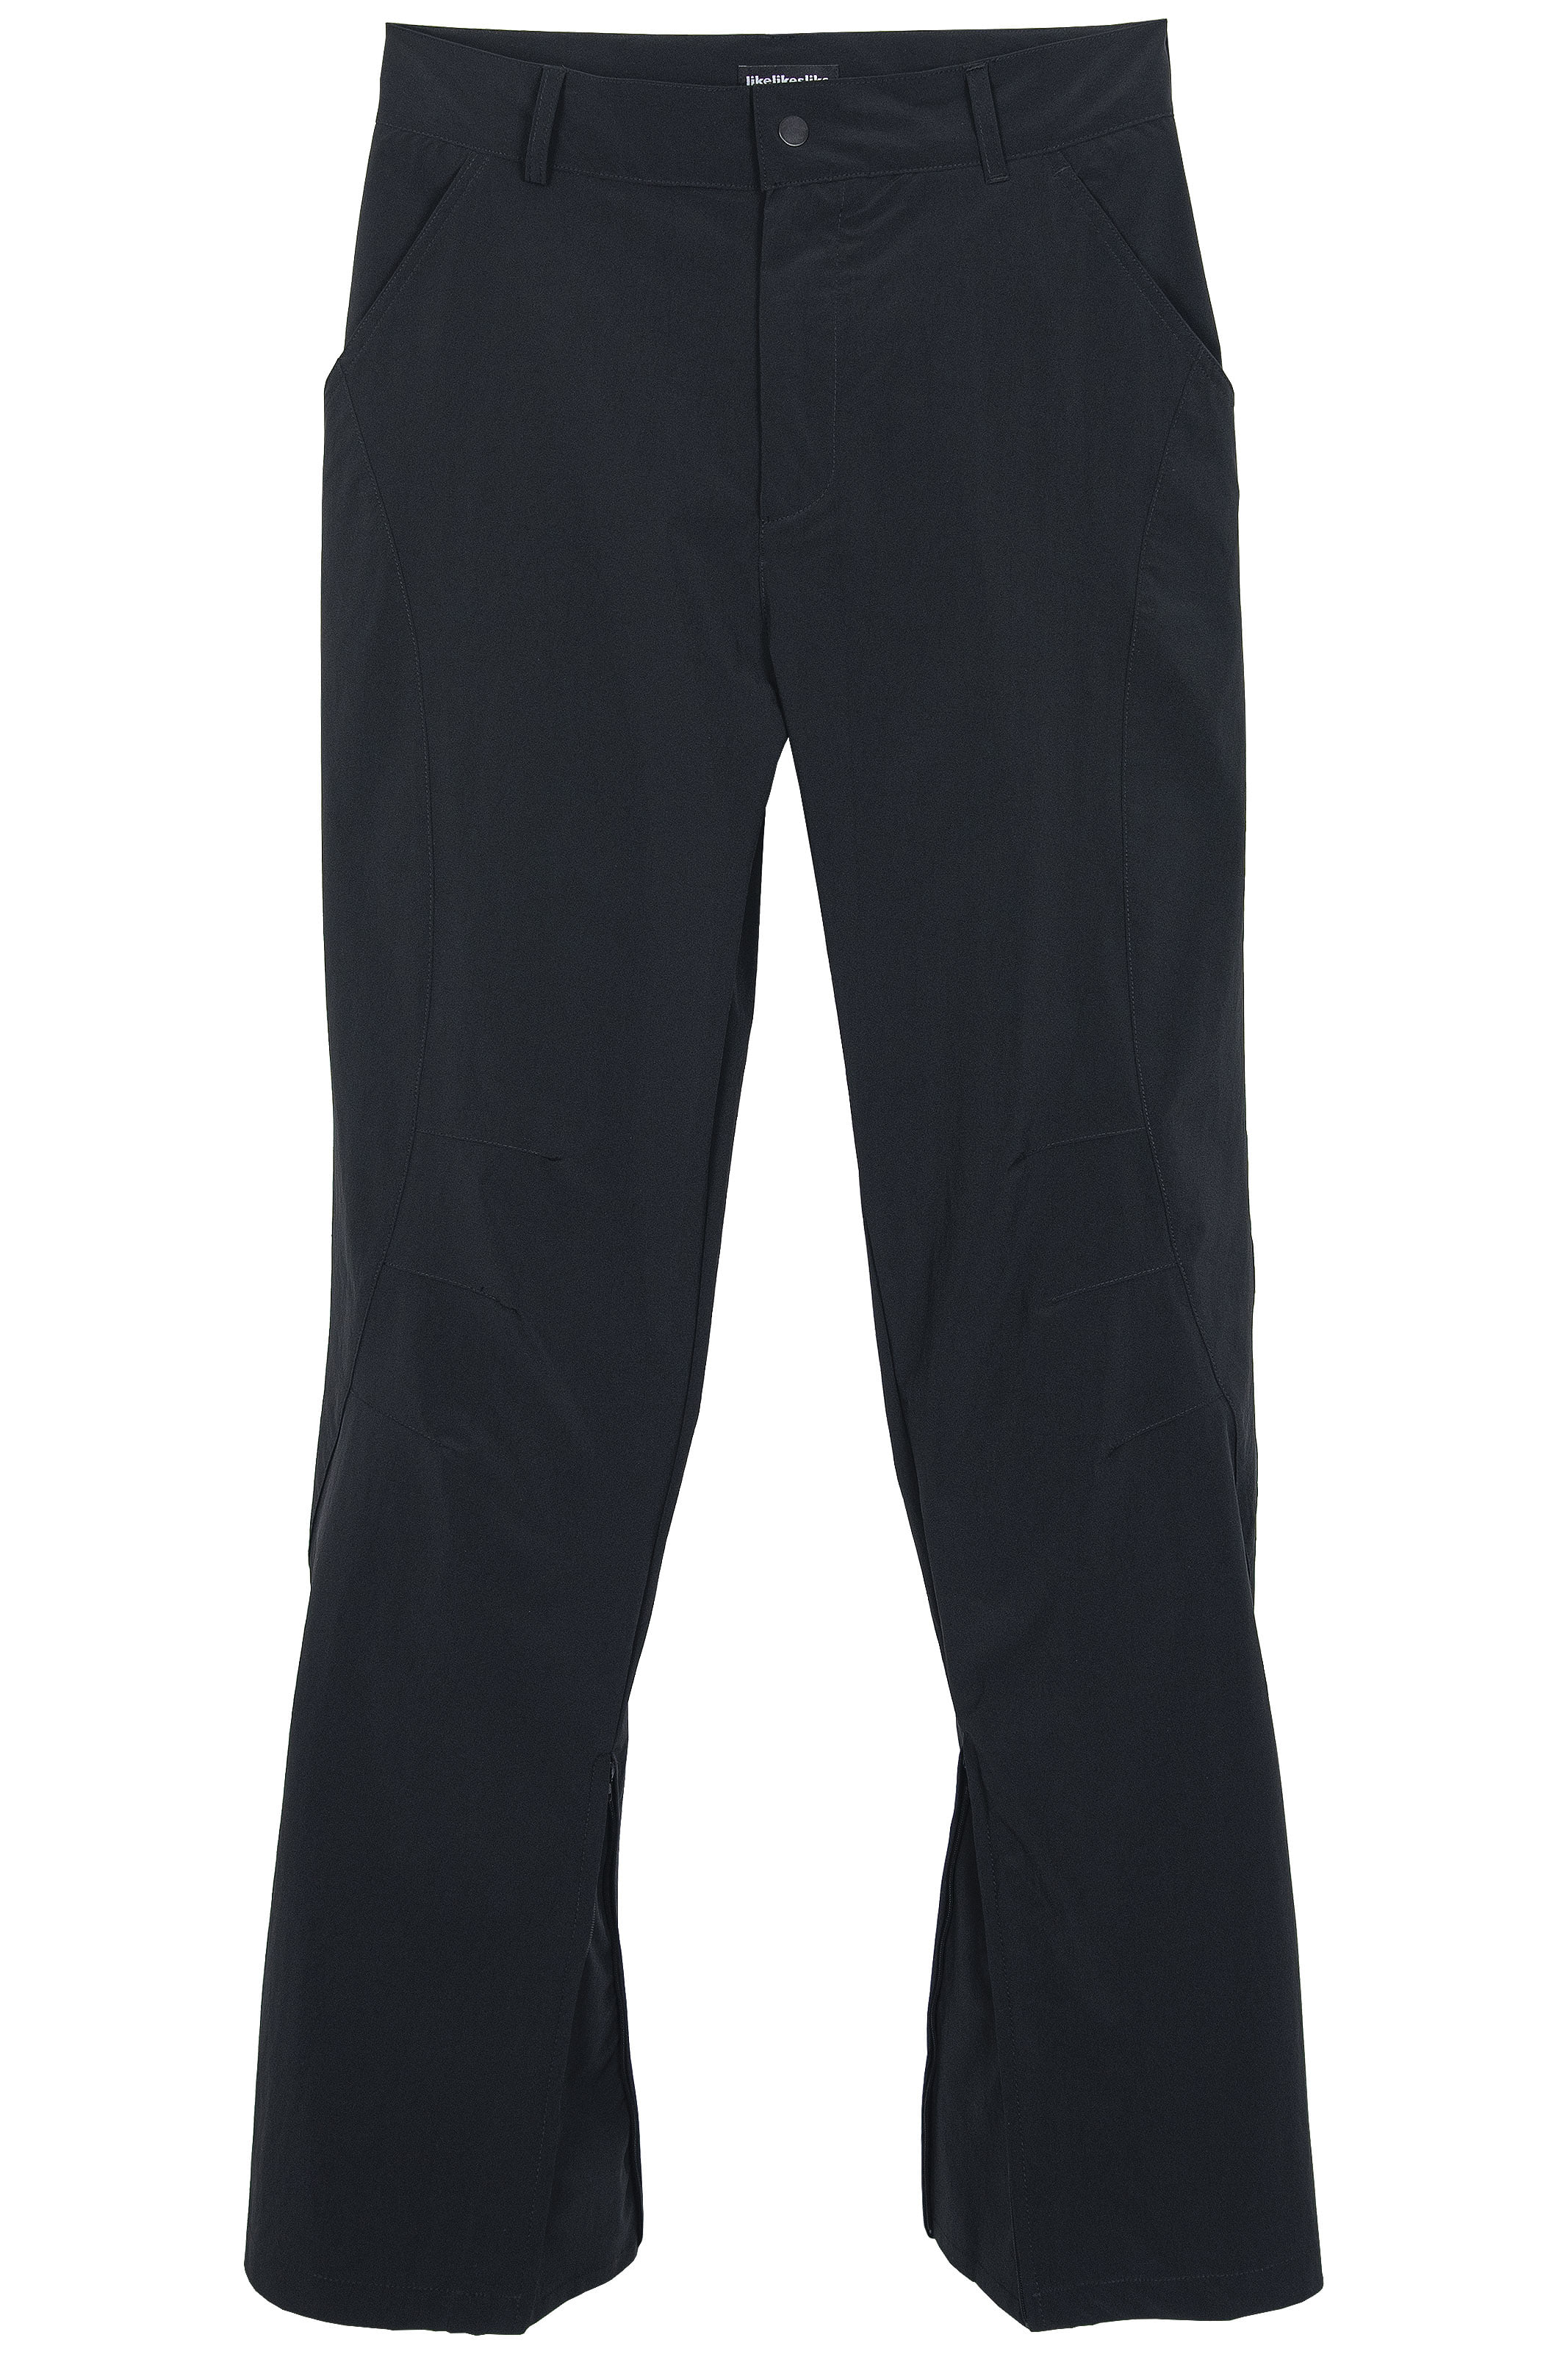 trousers, improved wearable, black